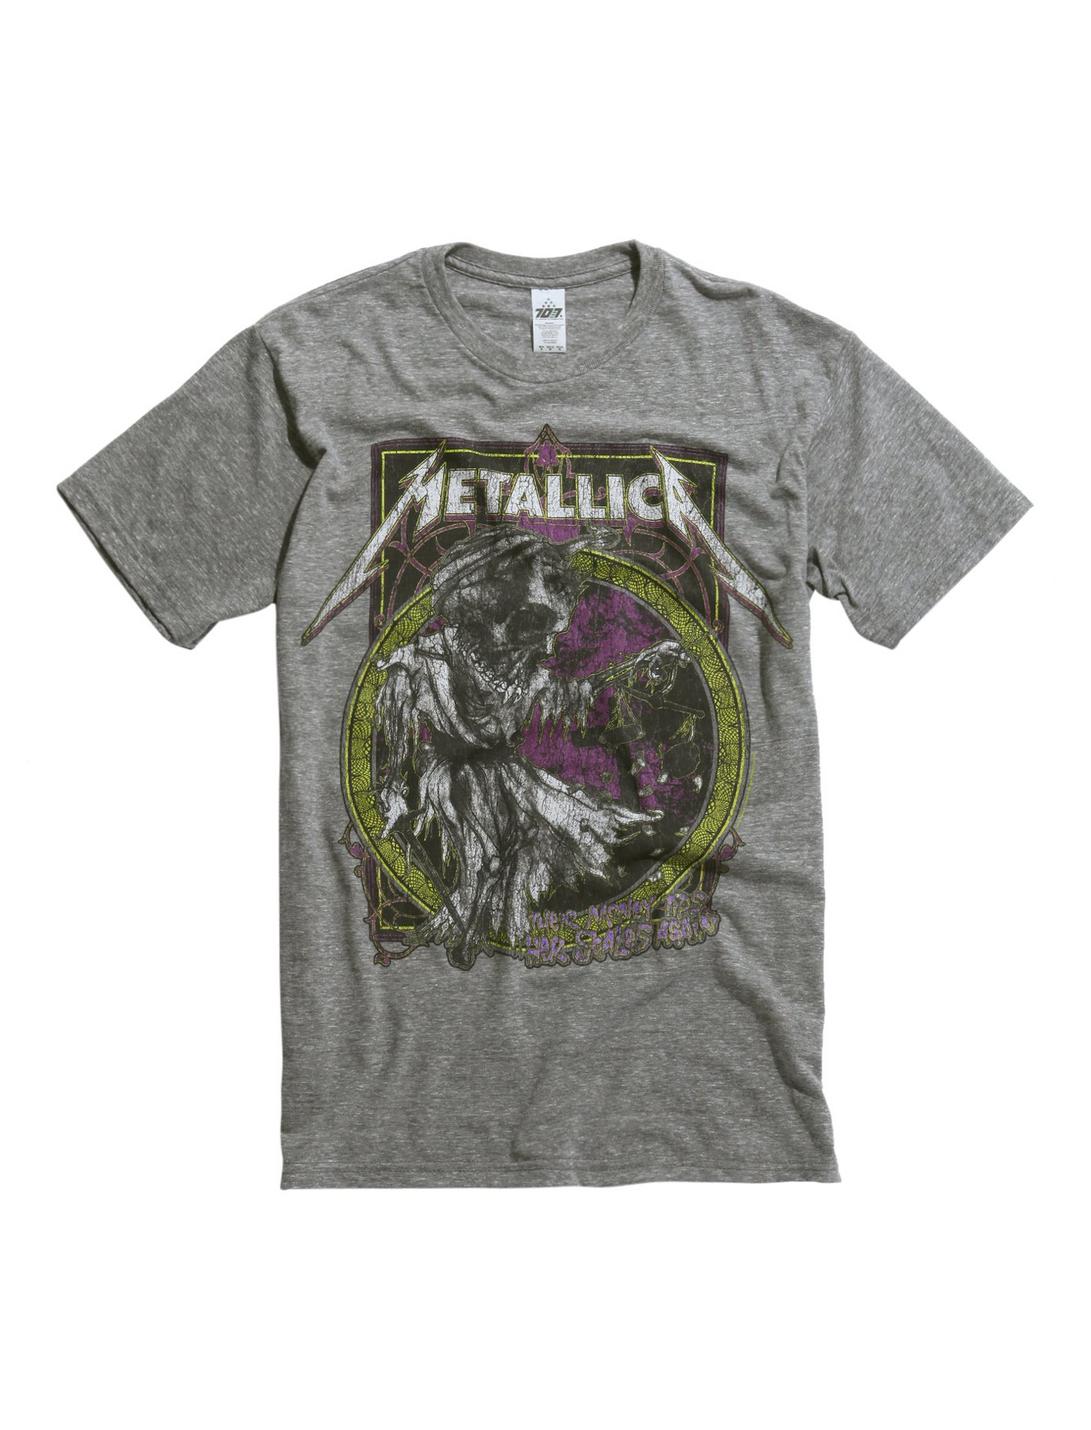 Metallica Their Money Tips Her Scales Again T-Shirt, HEATHER GREY, hi-res